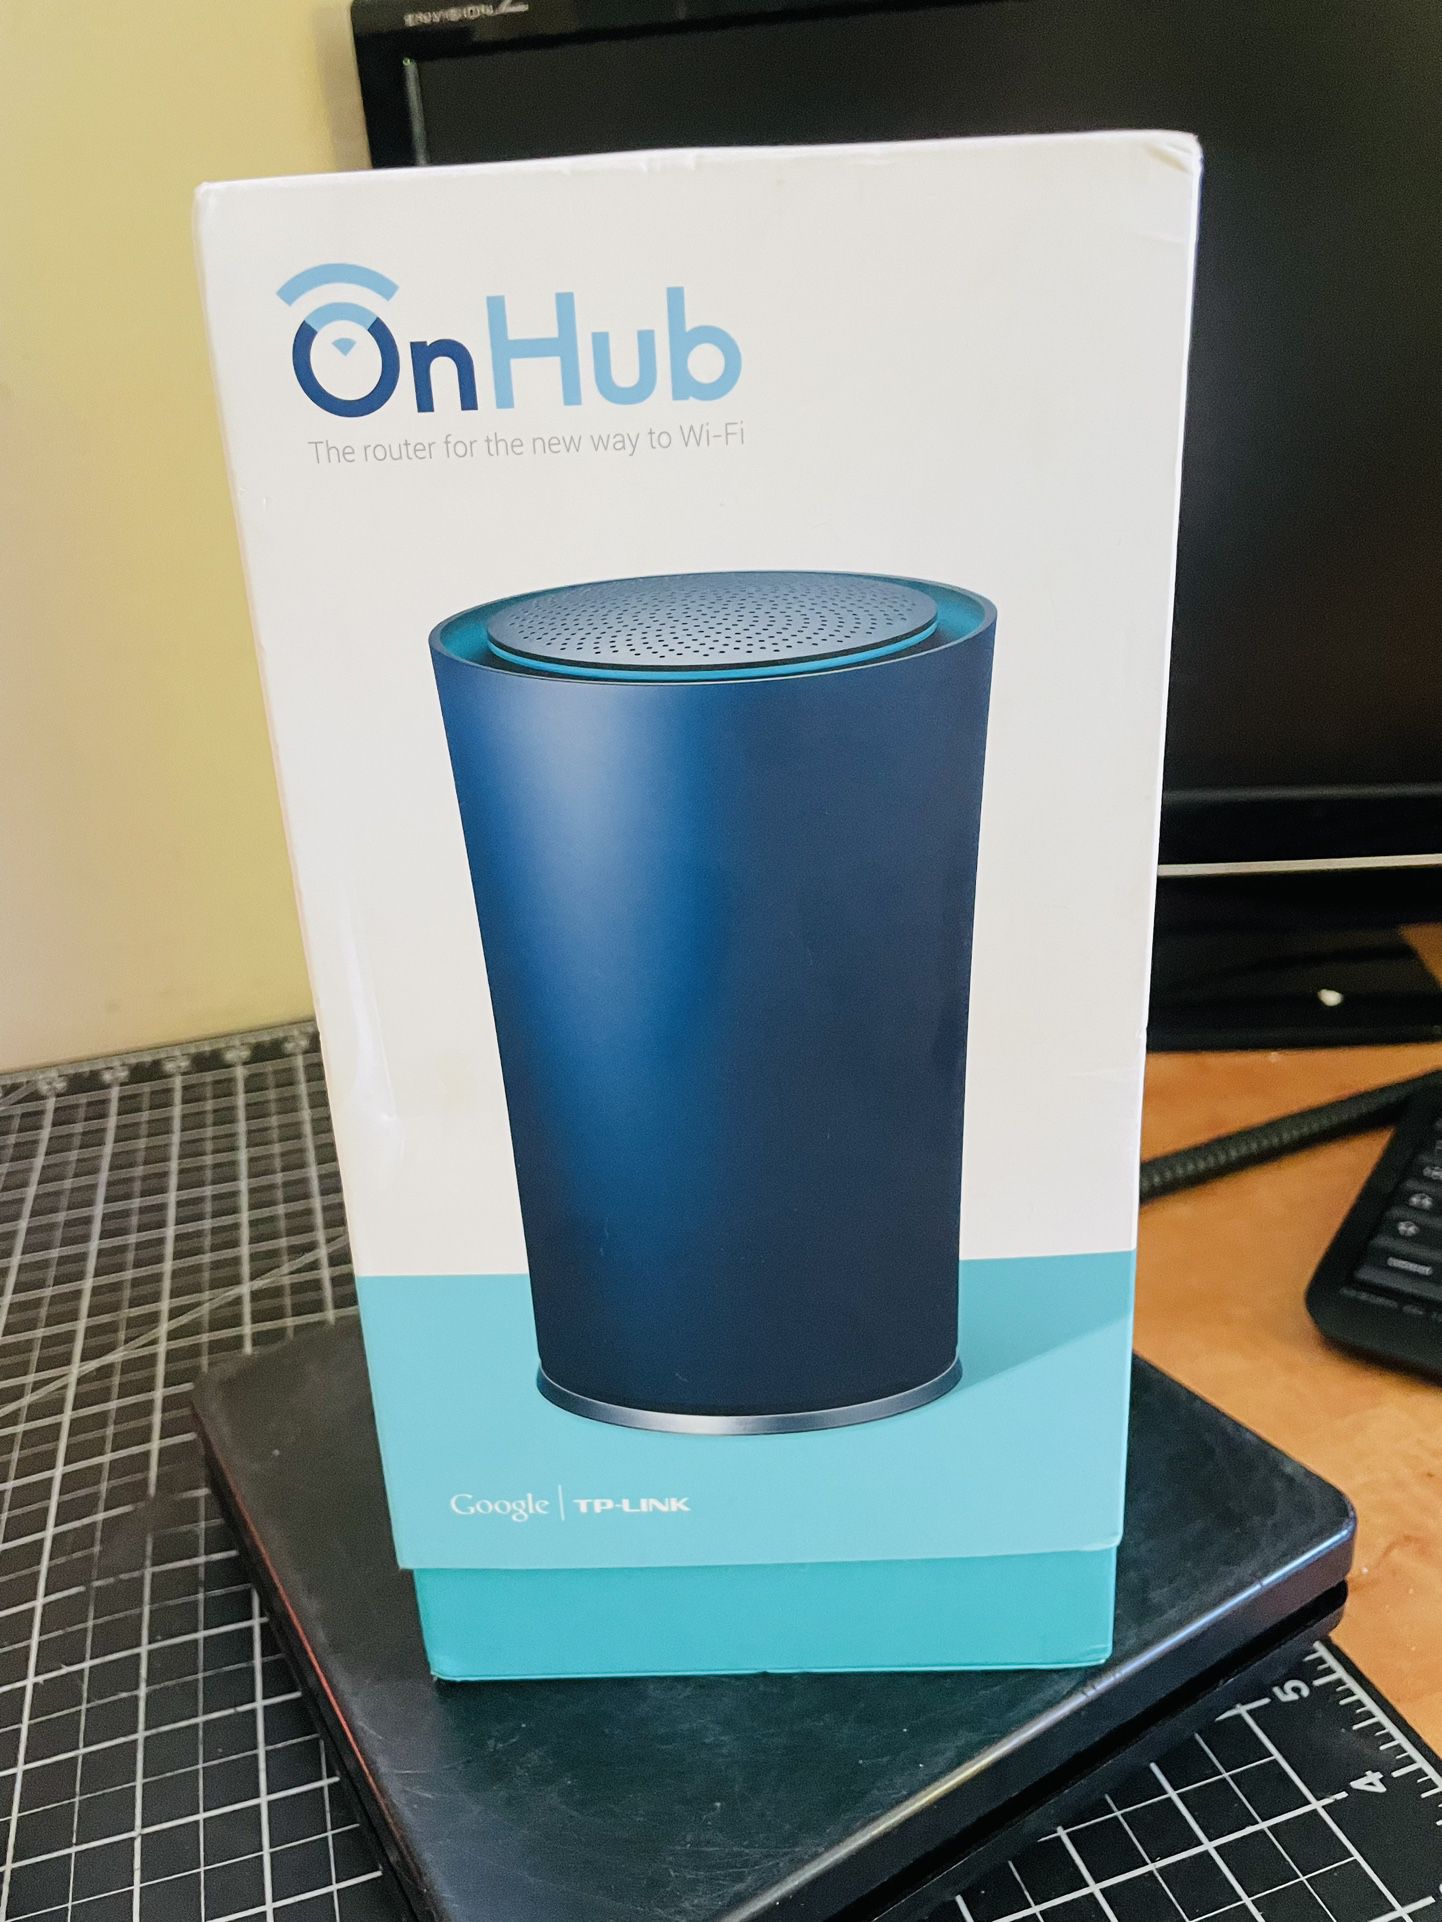 TP-Link OnHub Wireless Router from Google  BRAND NEW! NEVER OPENED!   Product Description Meet OnHub, the router from Google and TP-Link that’s built 